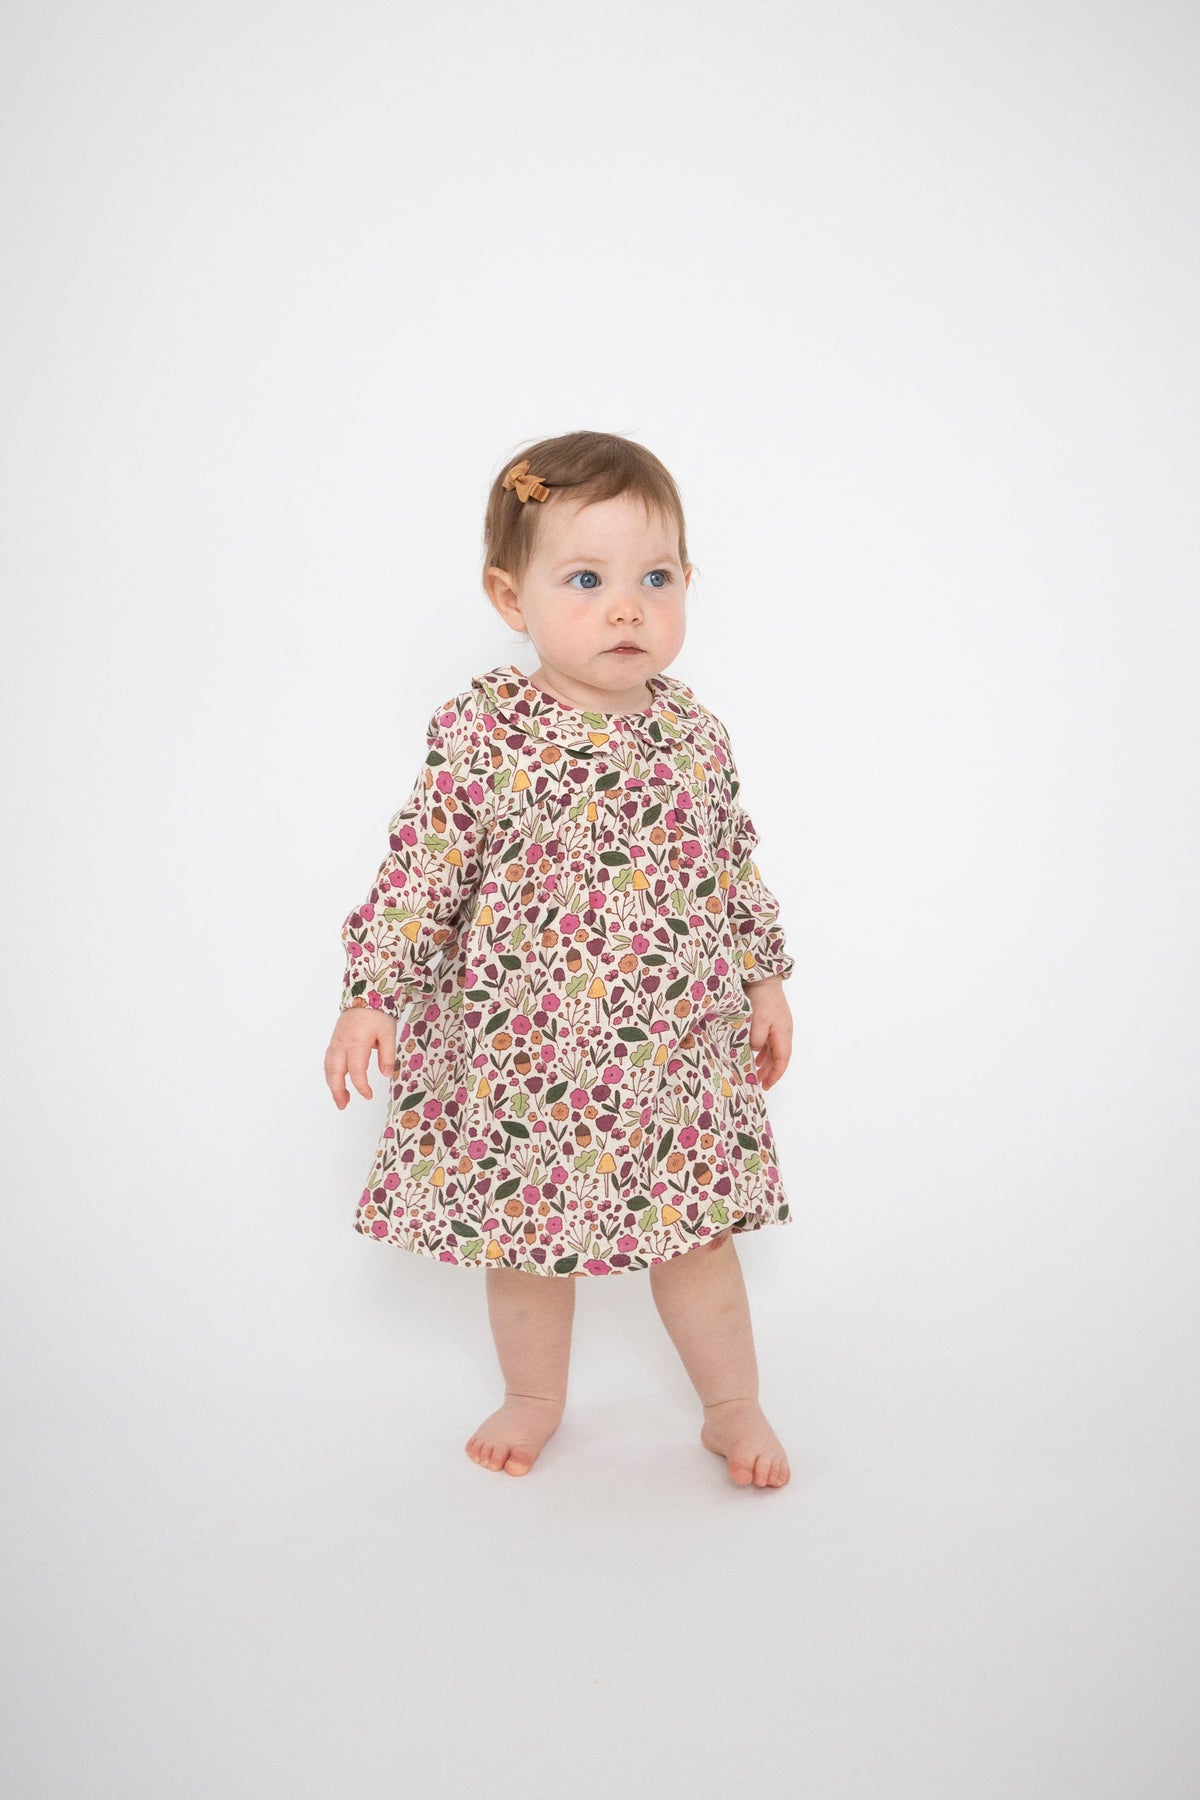 Angel Dear Acorn Floral Peter Pan Collar Dress and Diaper Cover